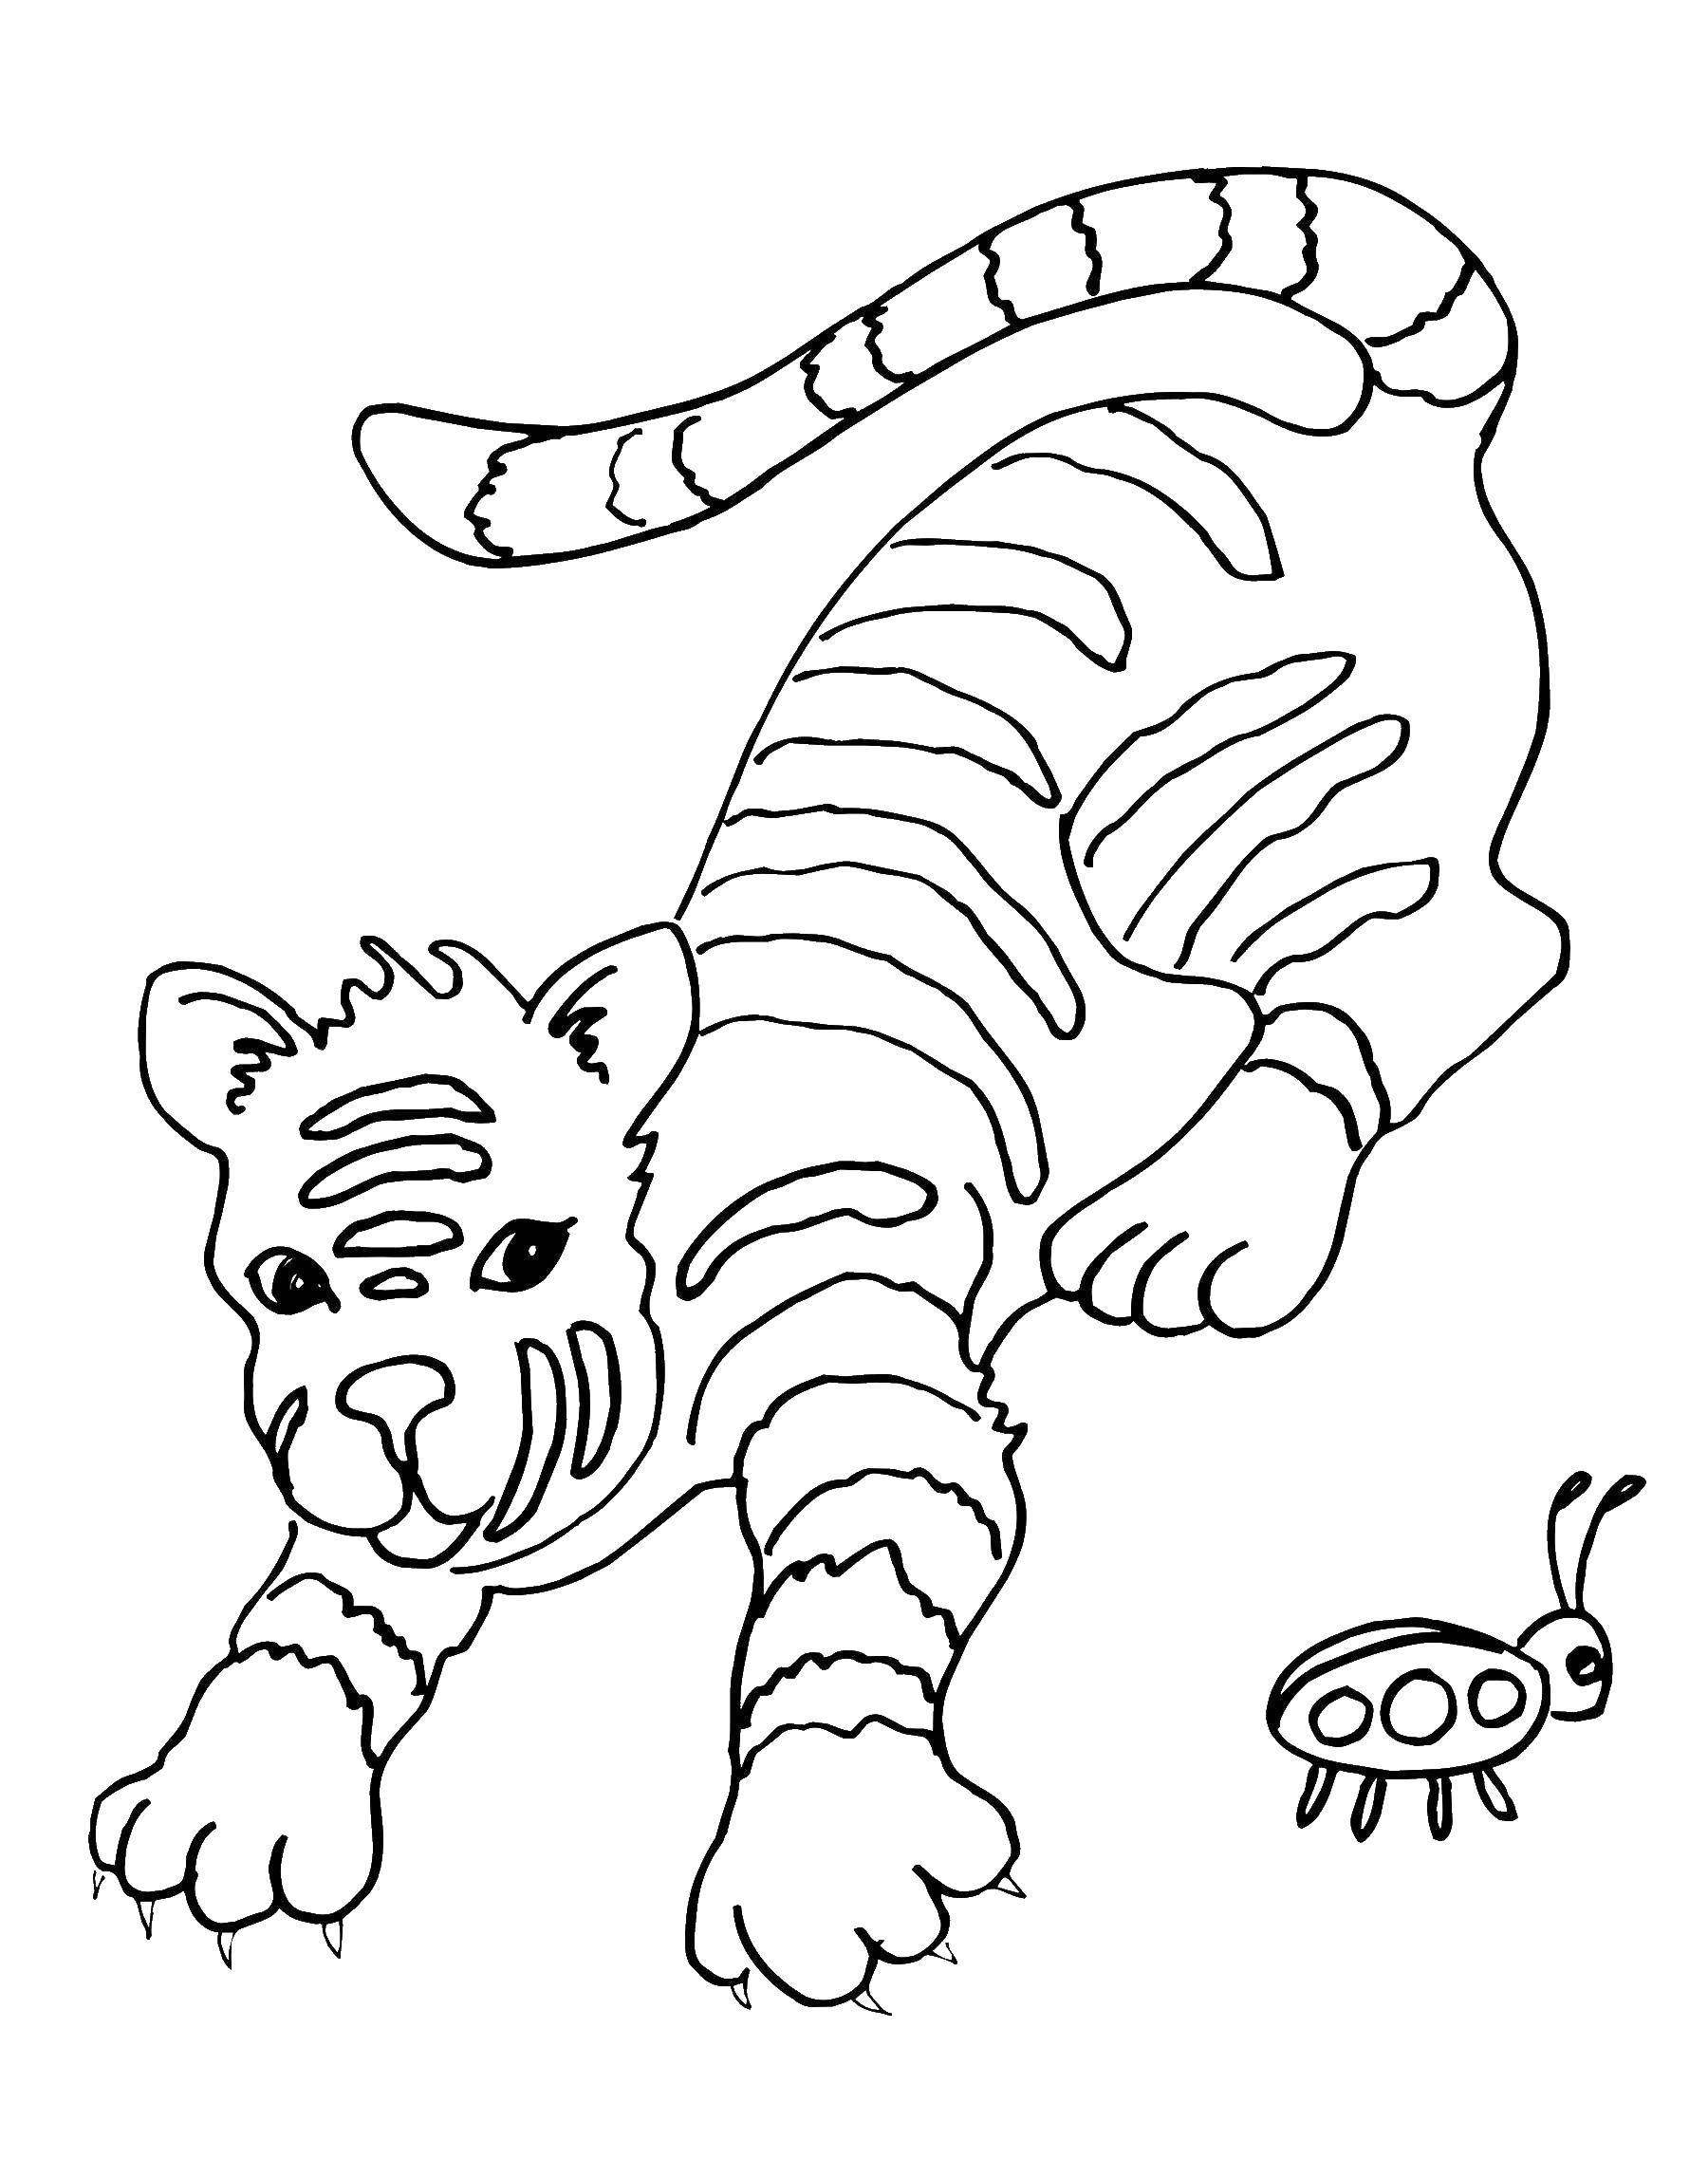 Coloring Striped tiger plays with Ladybird. Category Animals. Tags:  striped tiger.